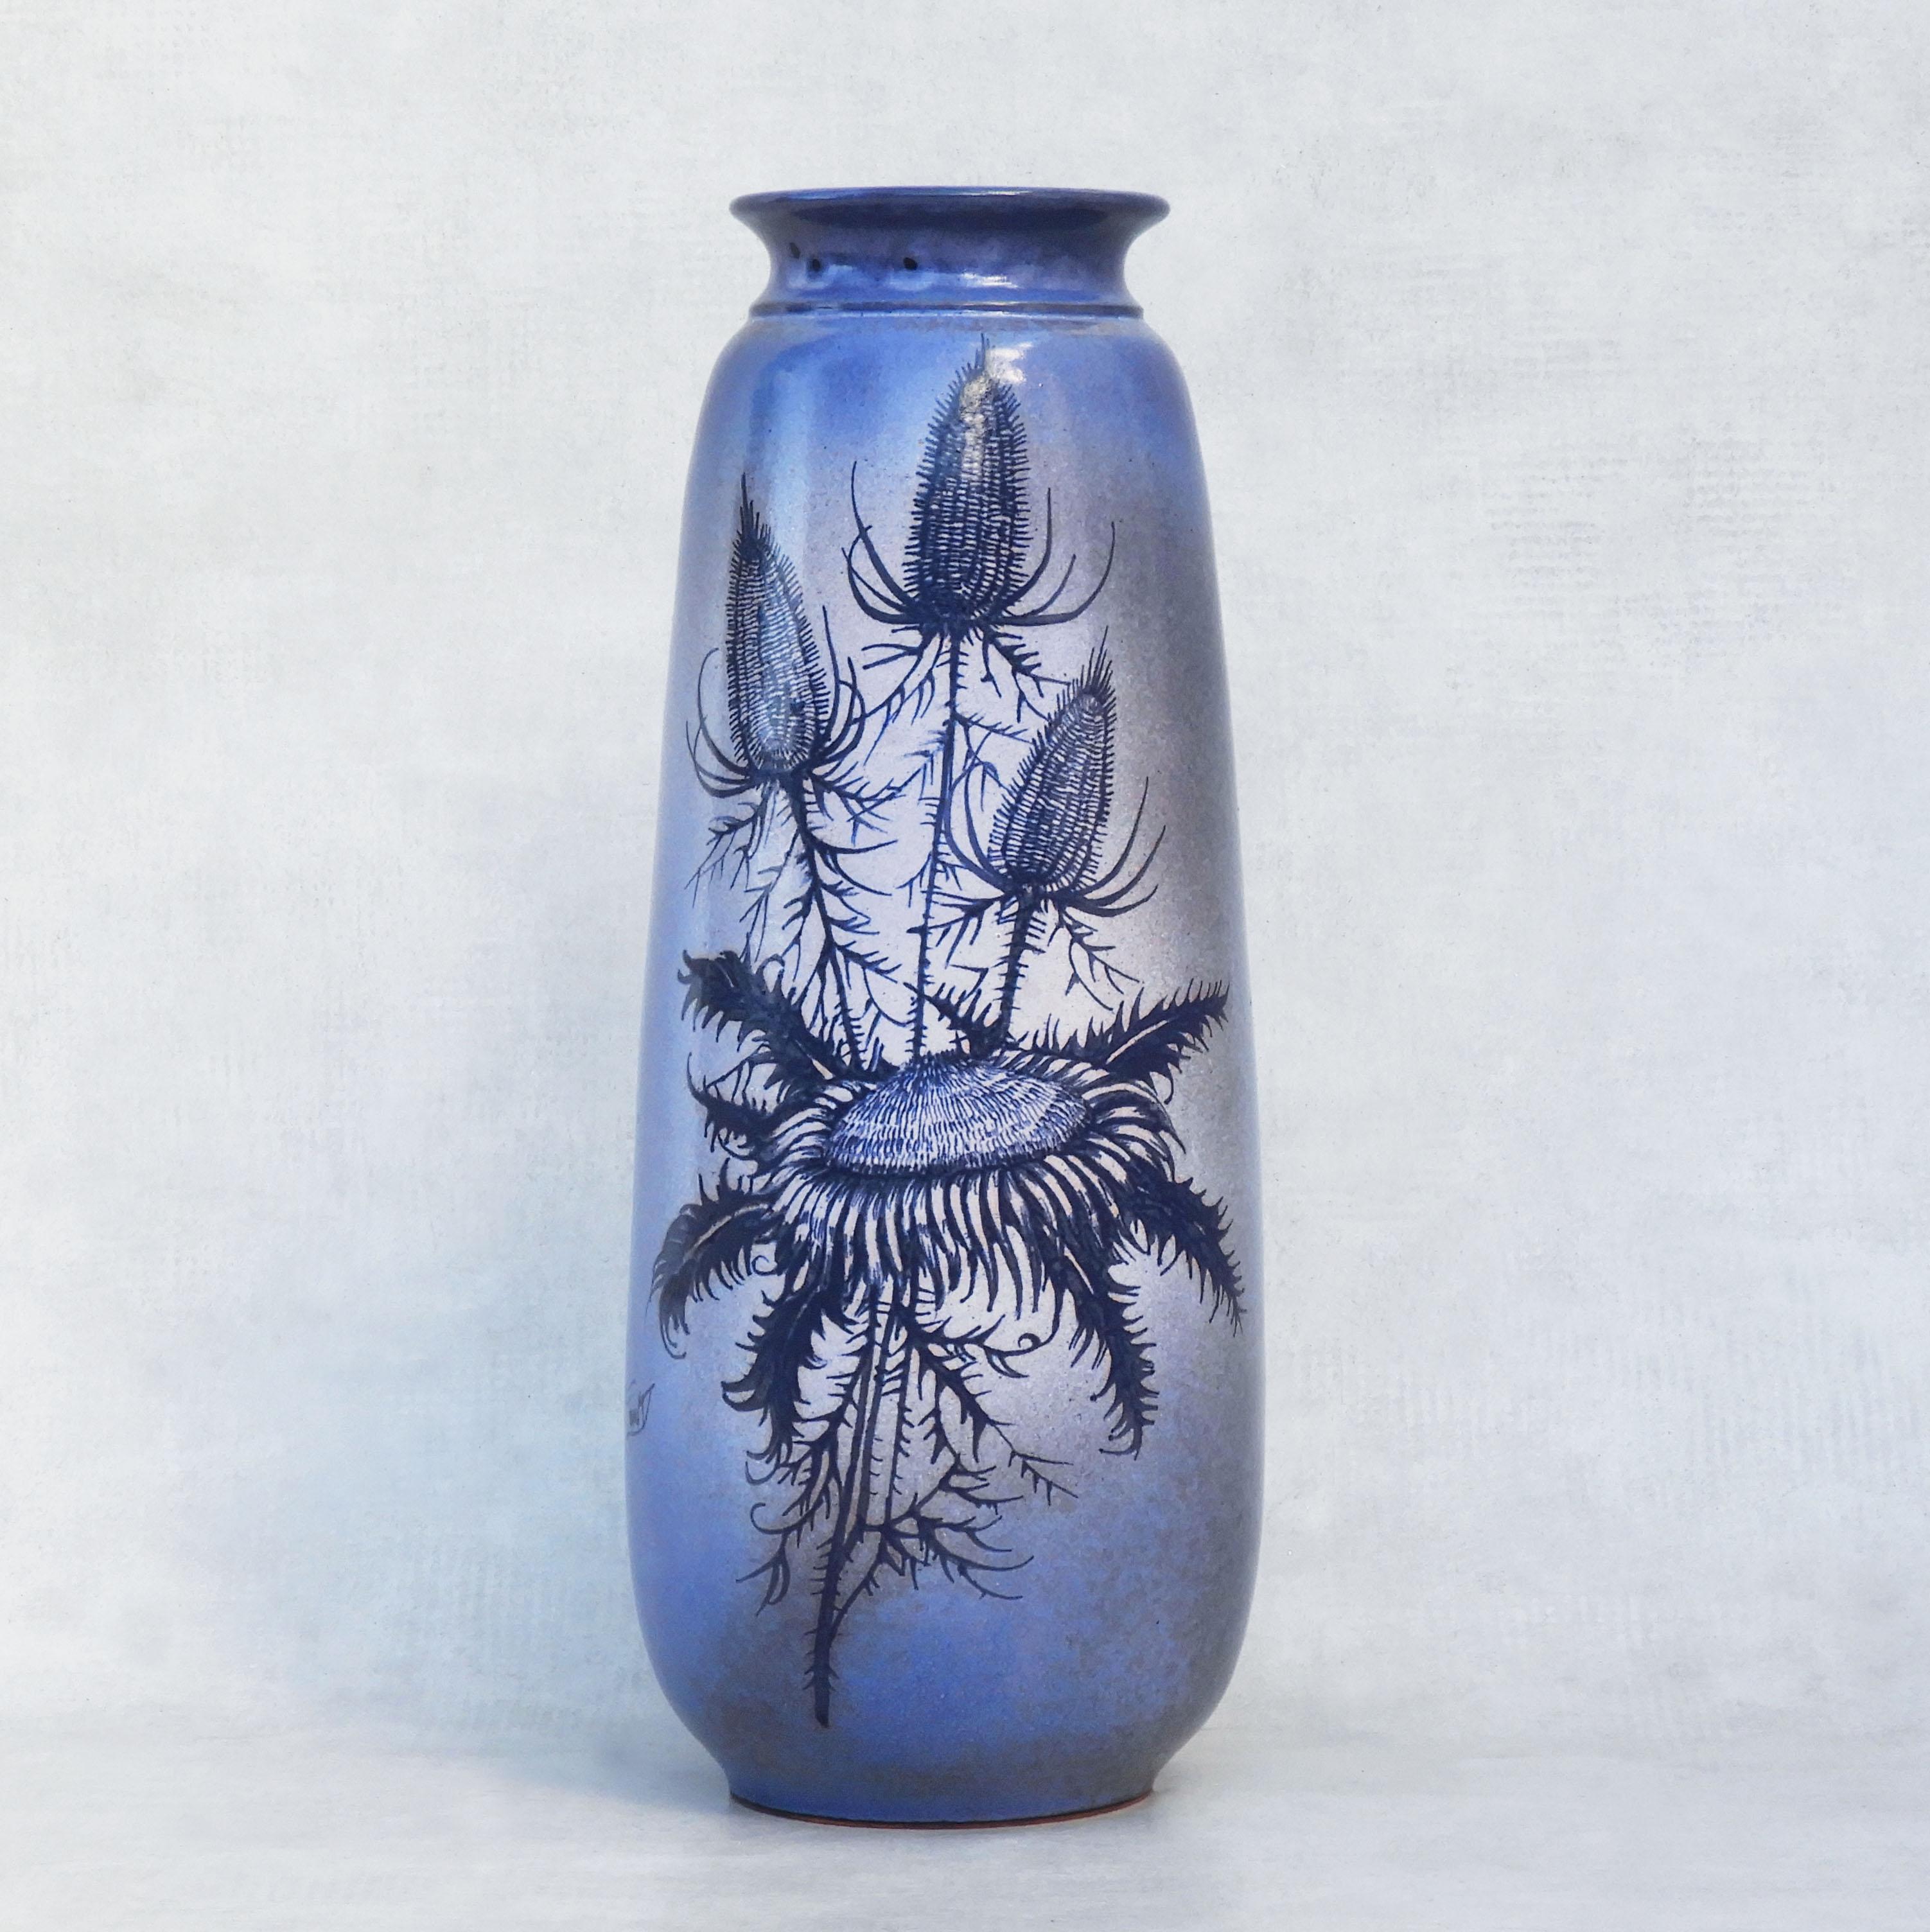 Mid-century Vallauris Vase by Jacques Fonck et Jean Mateo C1960s France

A tall attractive vase, in blue glaze with purple hues, beautifully hand-painted with an autumn bouquet of a sunflower and thistles (Les Chardons et le Tournesol).

A